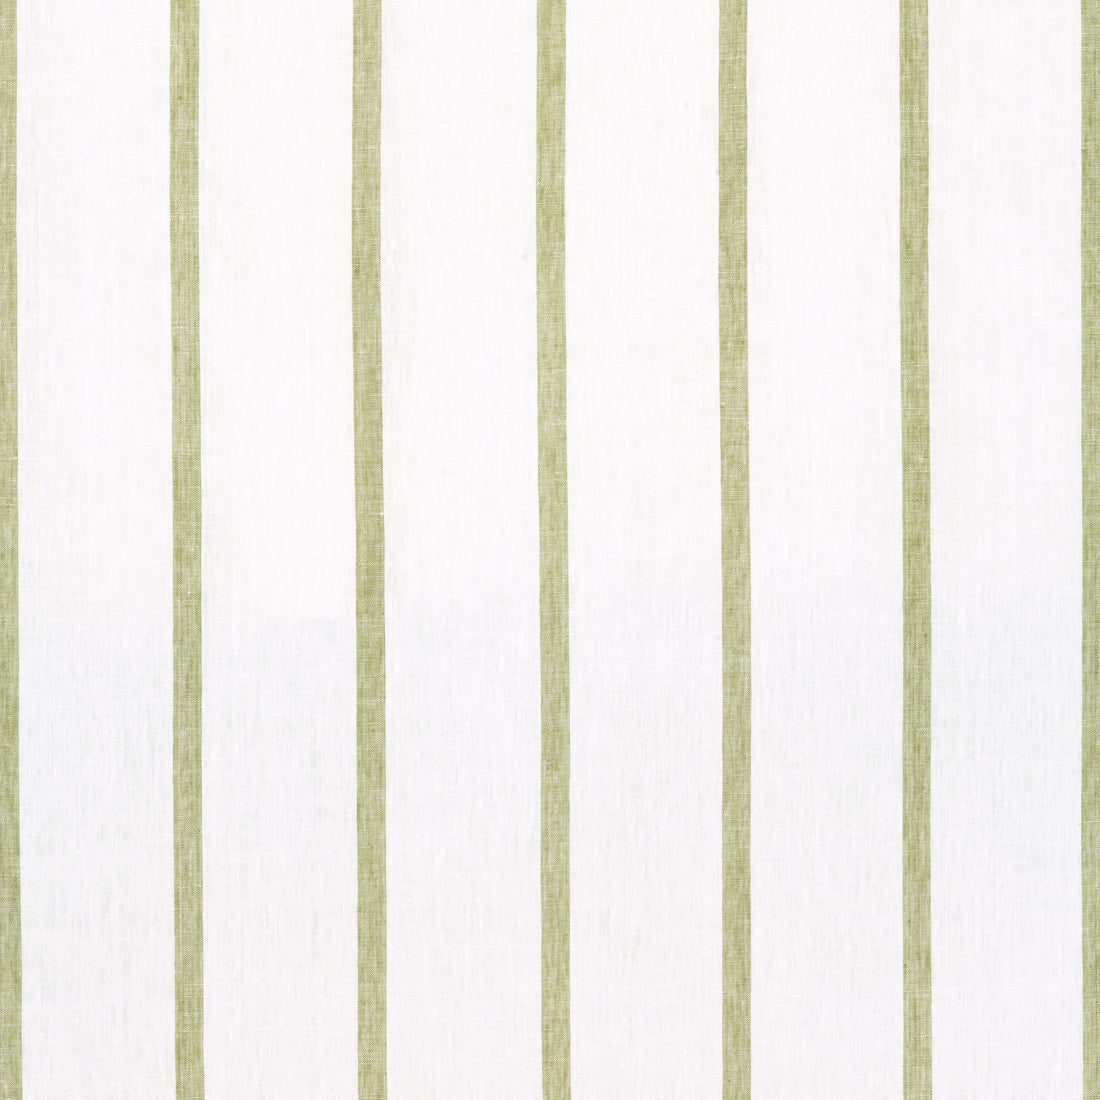 Sailing Stripe fabric in green and white color - pattern number AW15132 - by Anna French in the Antilles collection